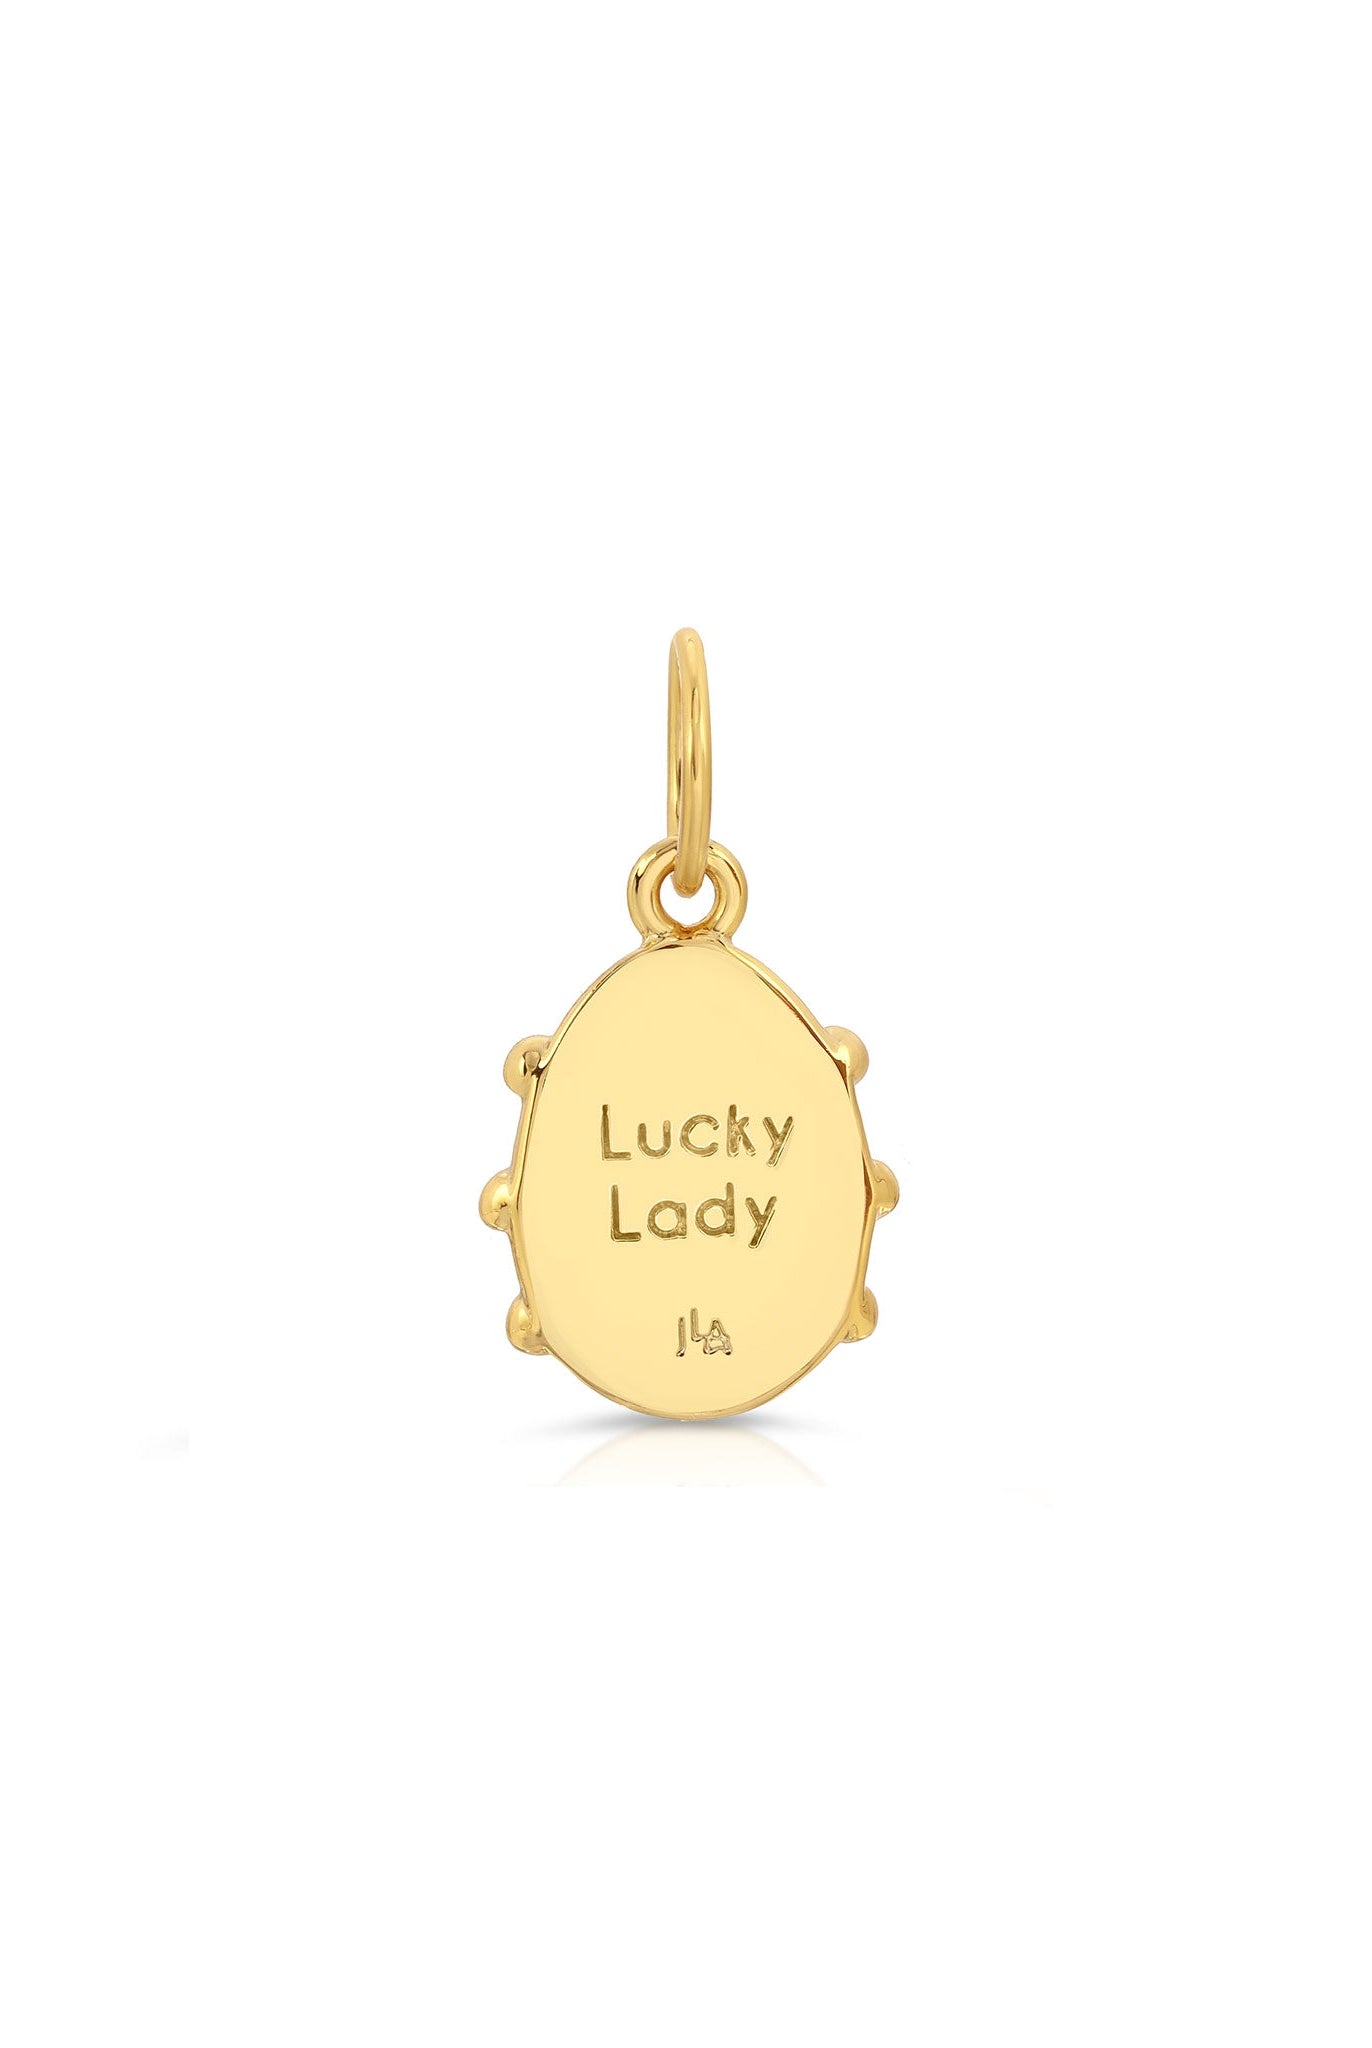 Lucky Lady - Charm-Charms-Vixen Collection, Day Spa and Women's Boutique Located in Seattle, Washington